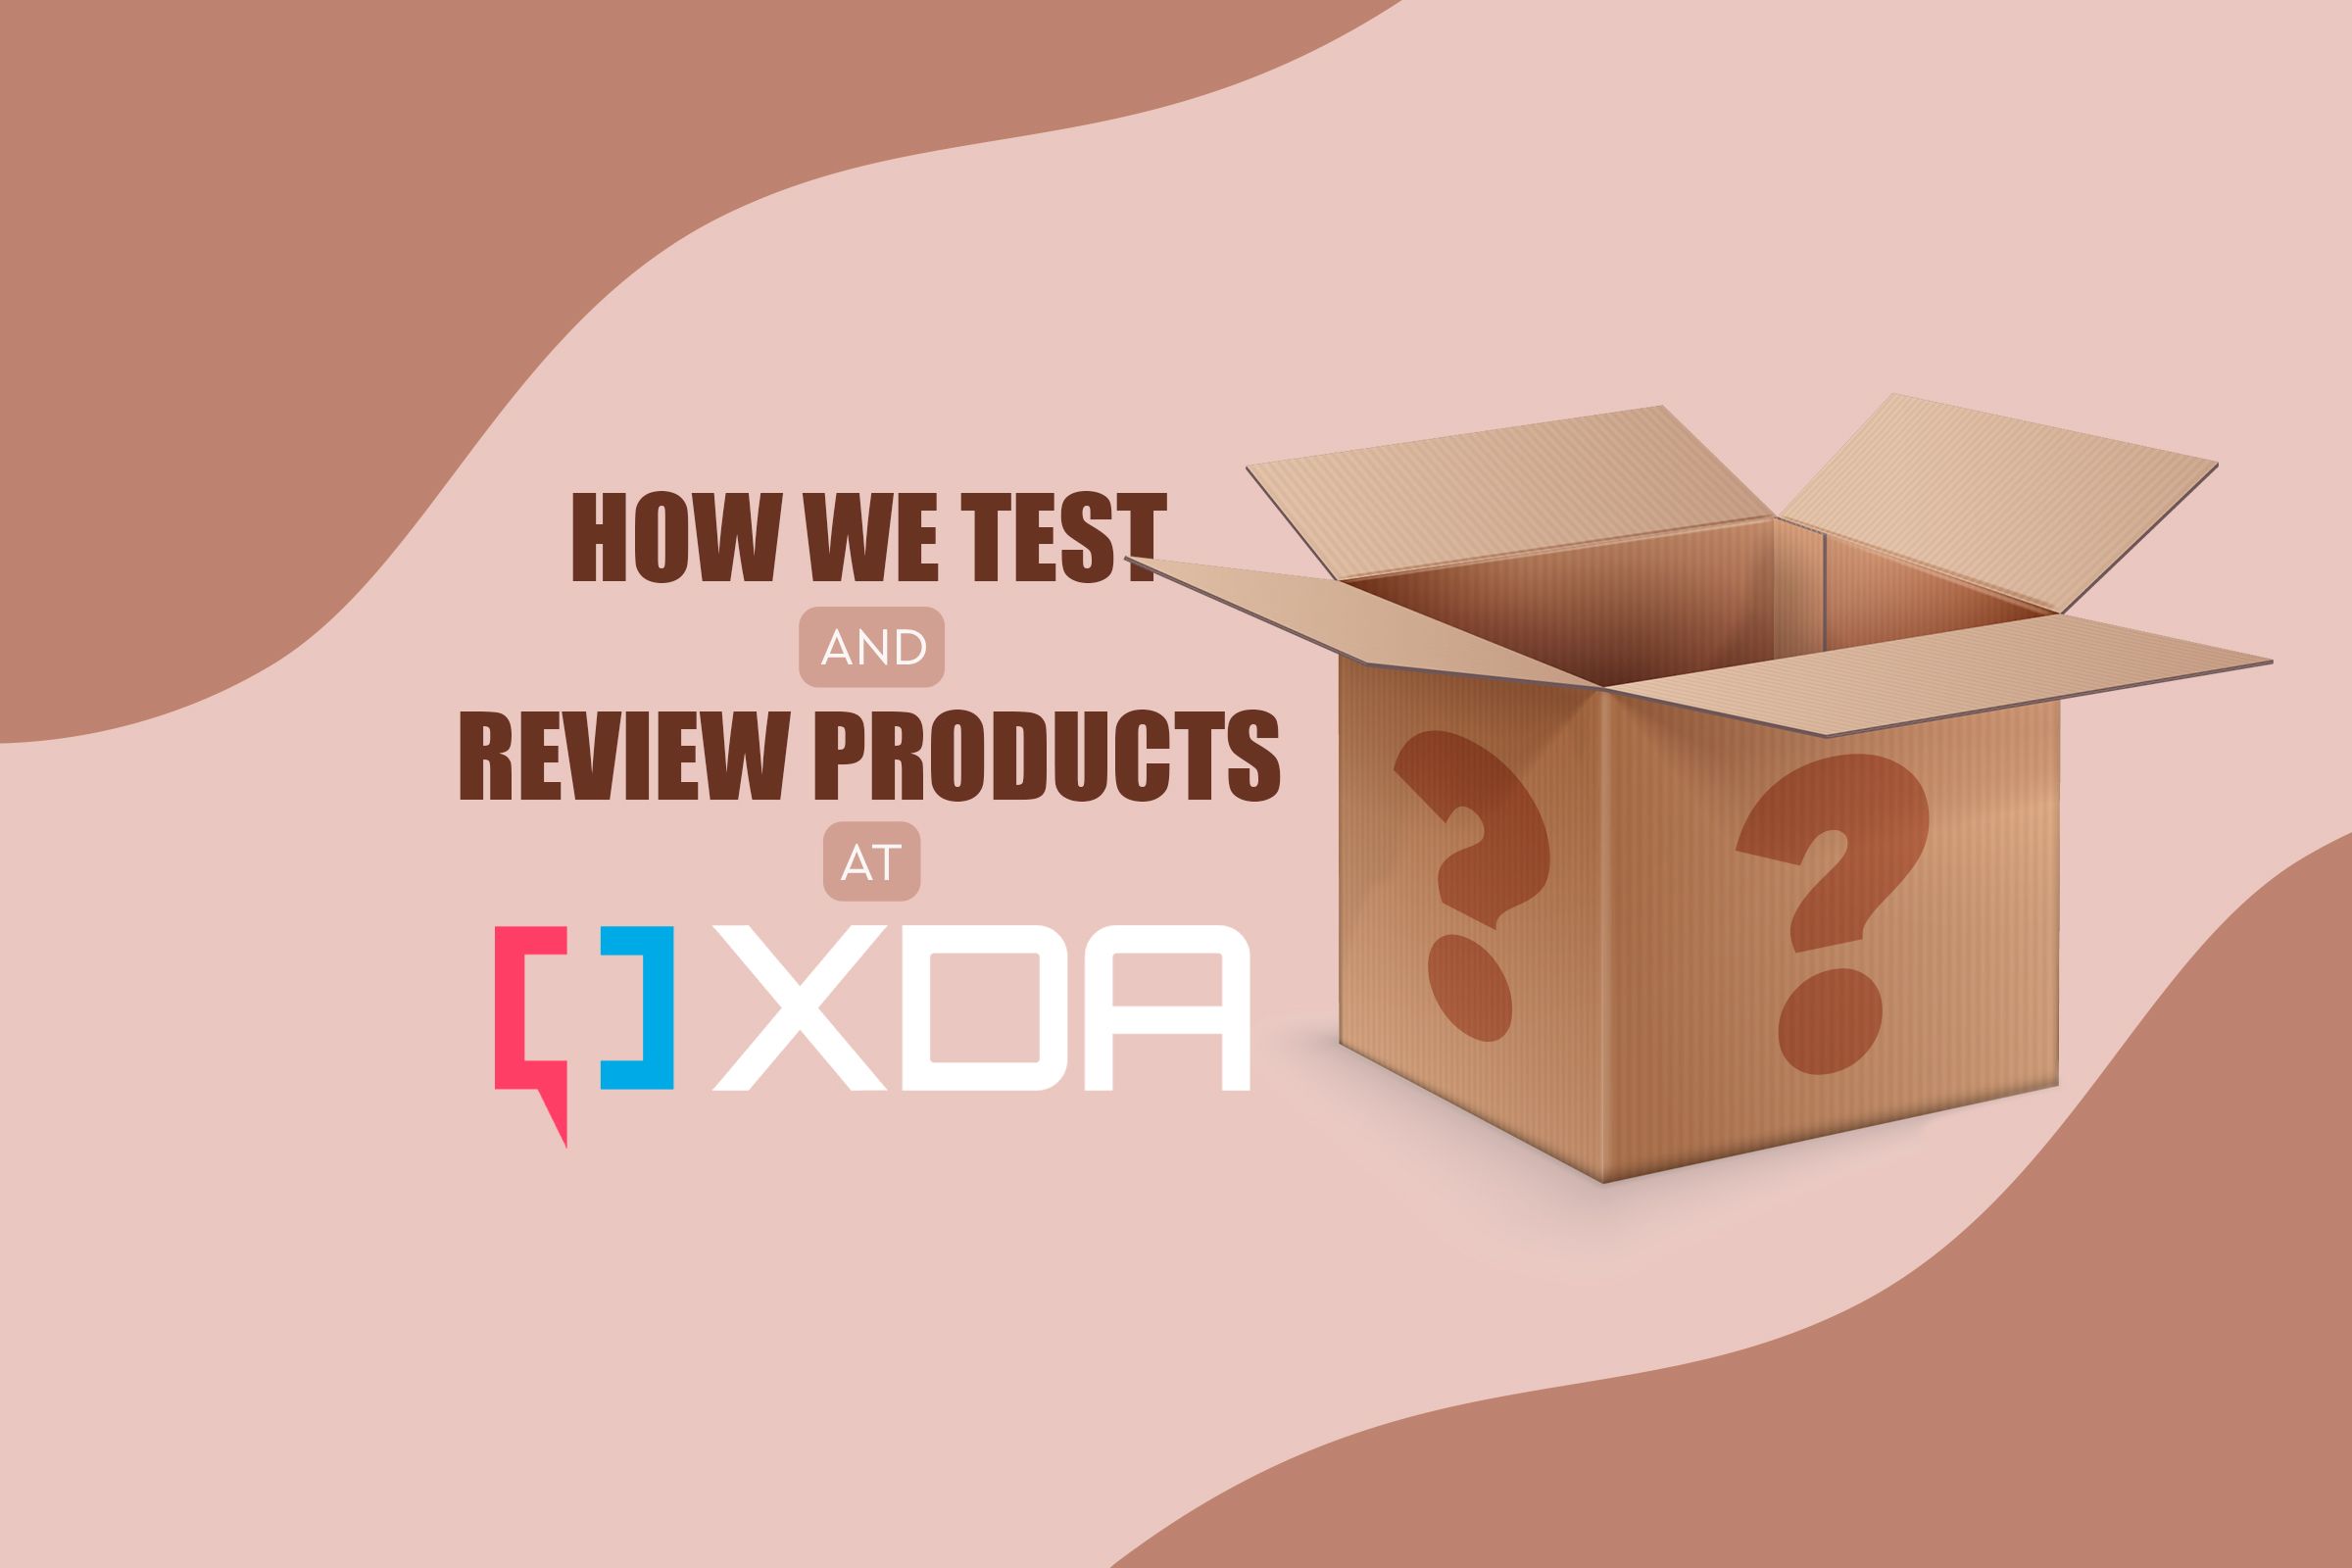 How we test and review products at XDA